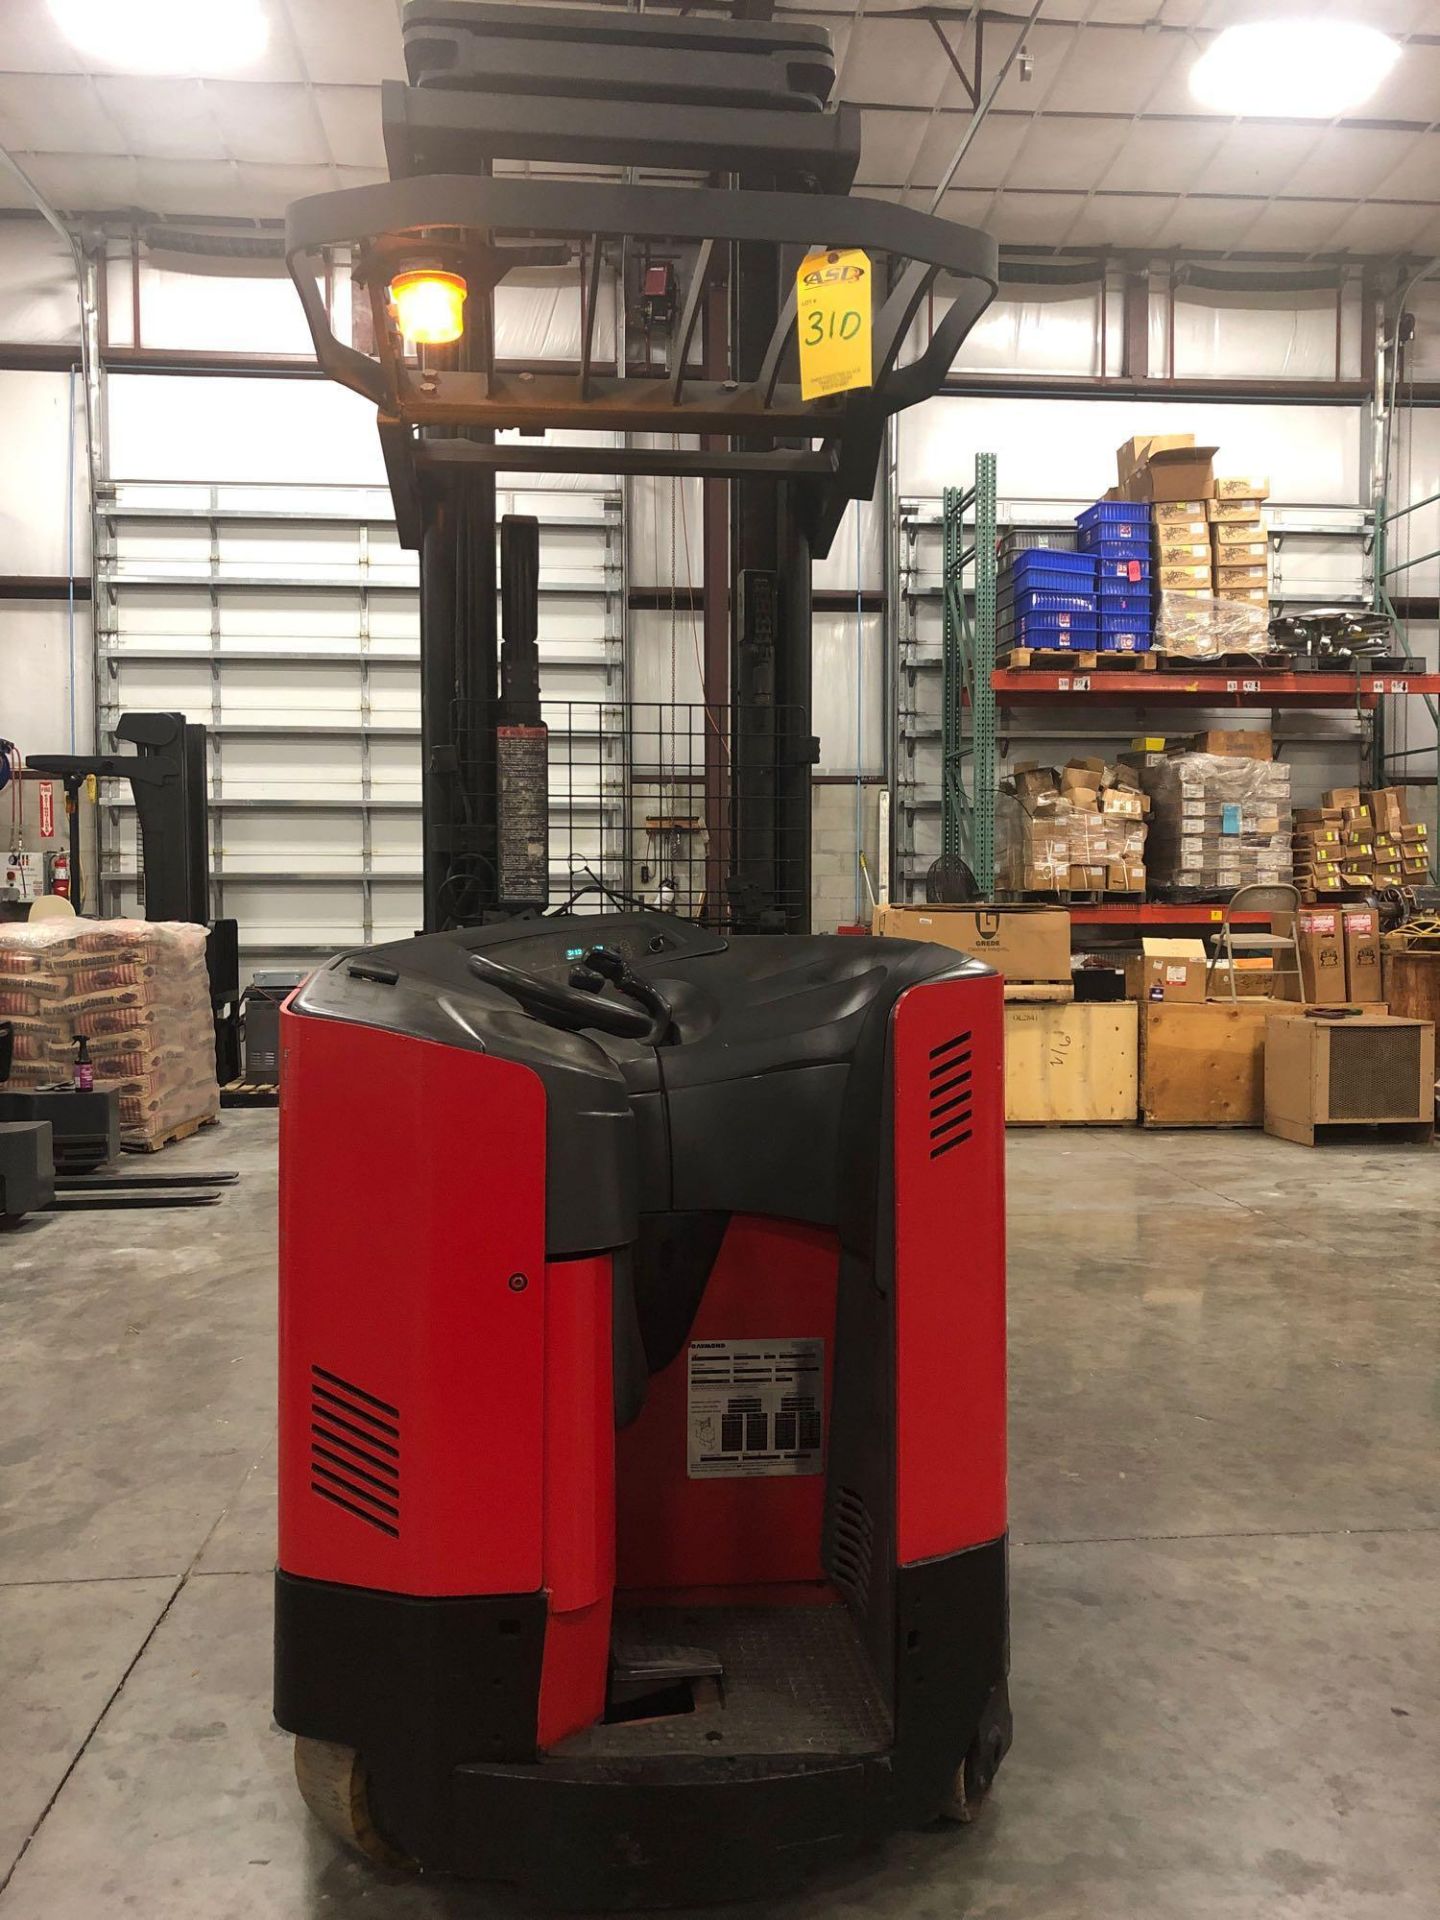 RAYMOND ELECTRIC FORKLIFT MODEL 740 R45TT, APPROX. 4,500 LB CAPACITY, TILT, REACH, BUILT IN SCALE - Image 3 of 7